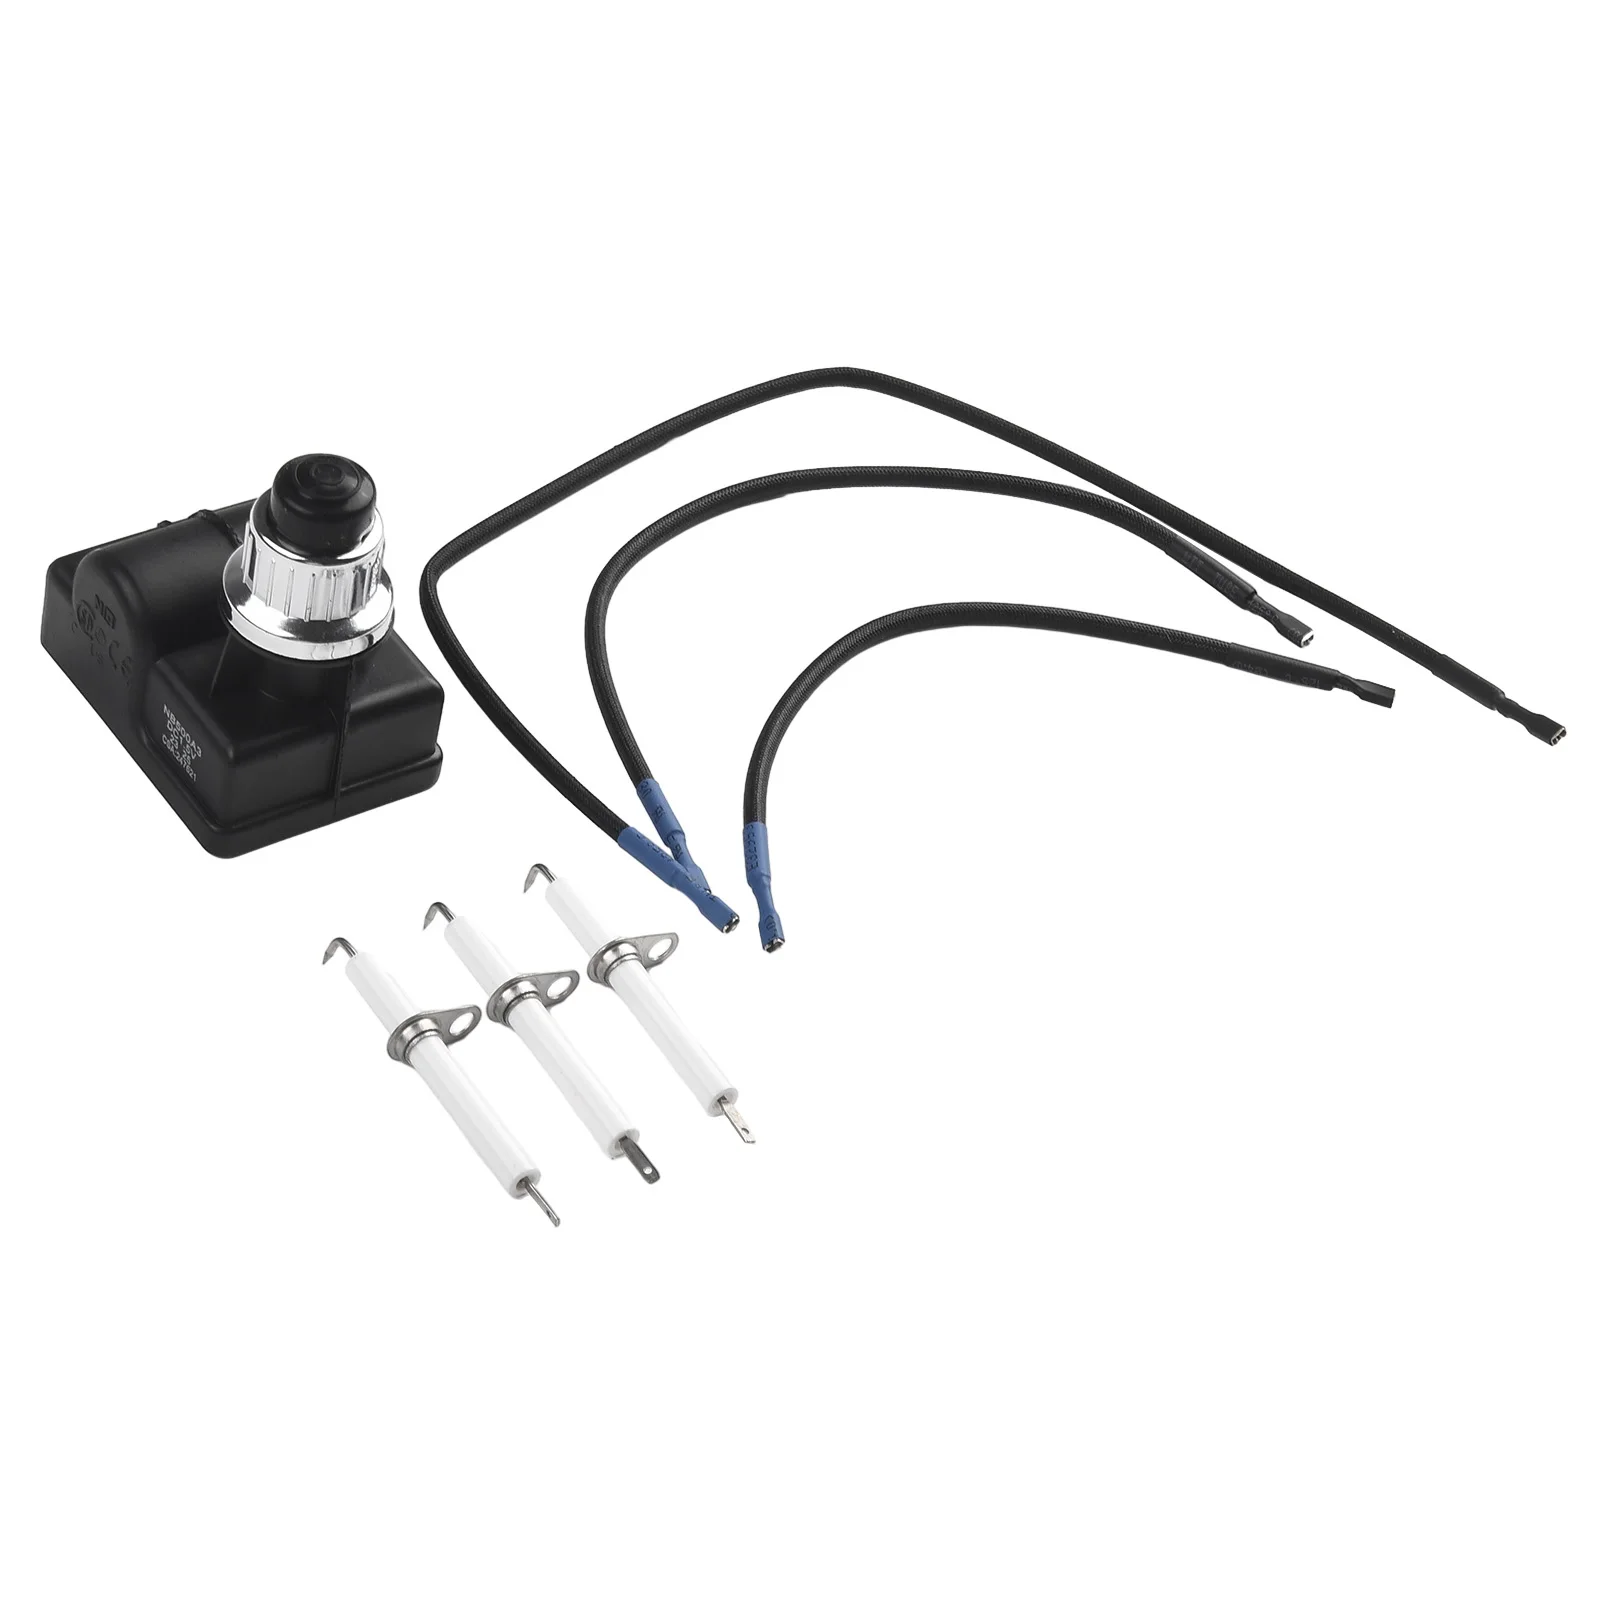 

TS IG3007 Grill Replacement Parts for PitBoss Includes 3 Wires 3 Electrode Ignitor Ensures Dependable Ignition Every Time